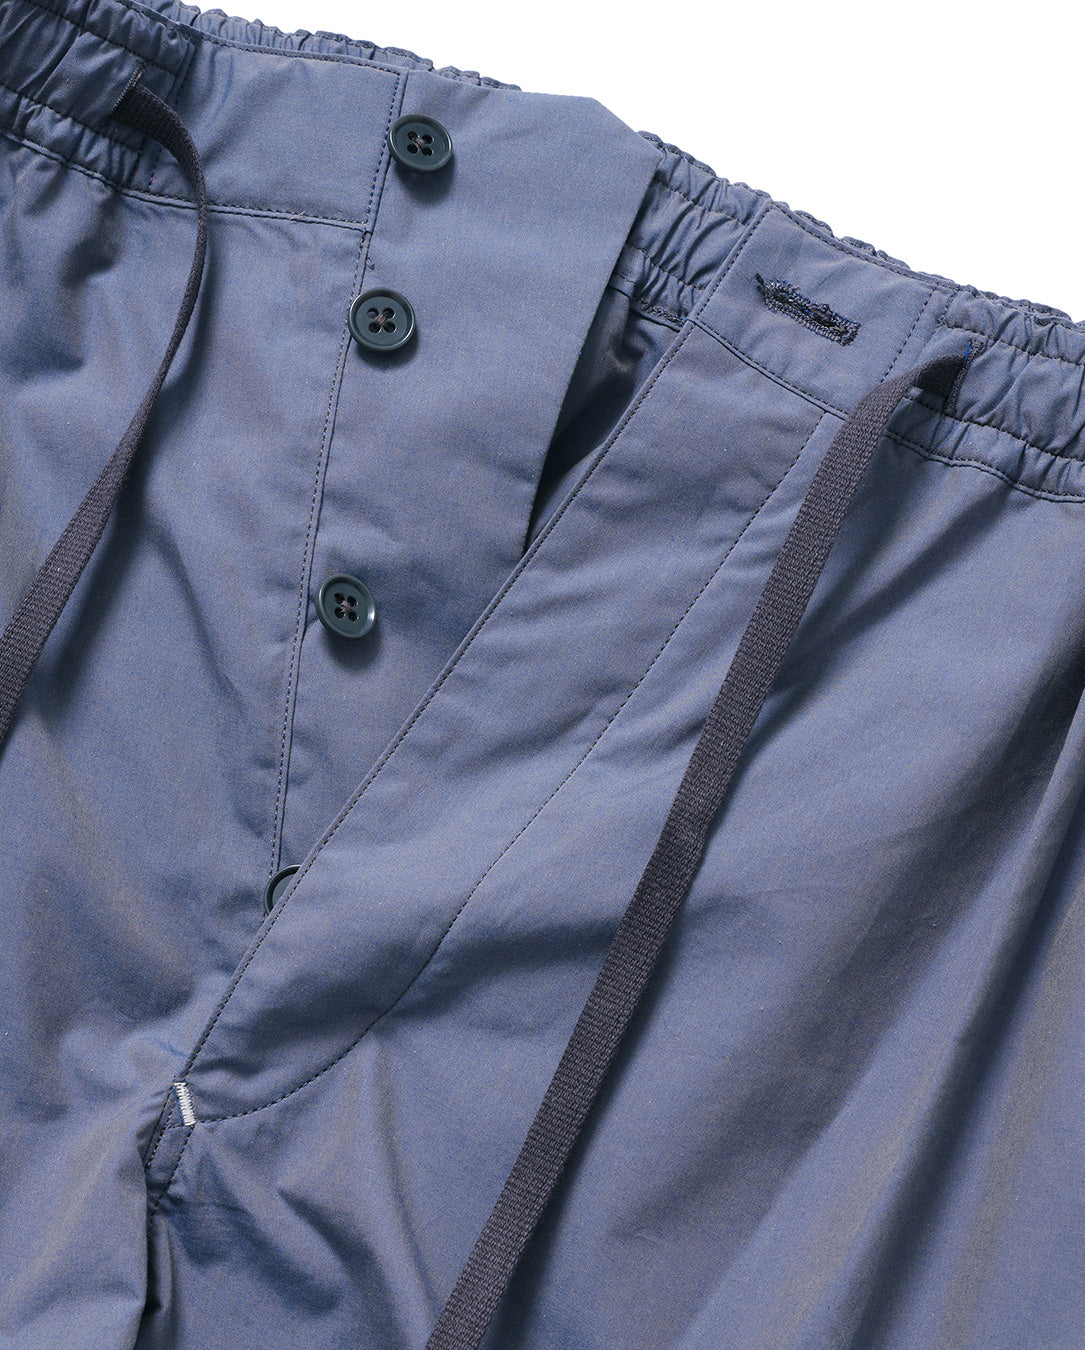 Thicker Trousers blue gray